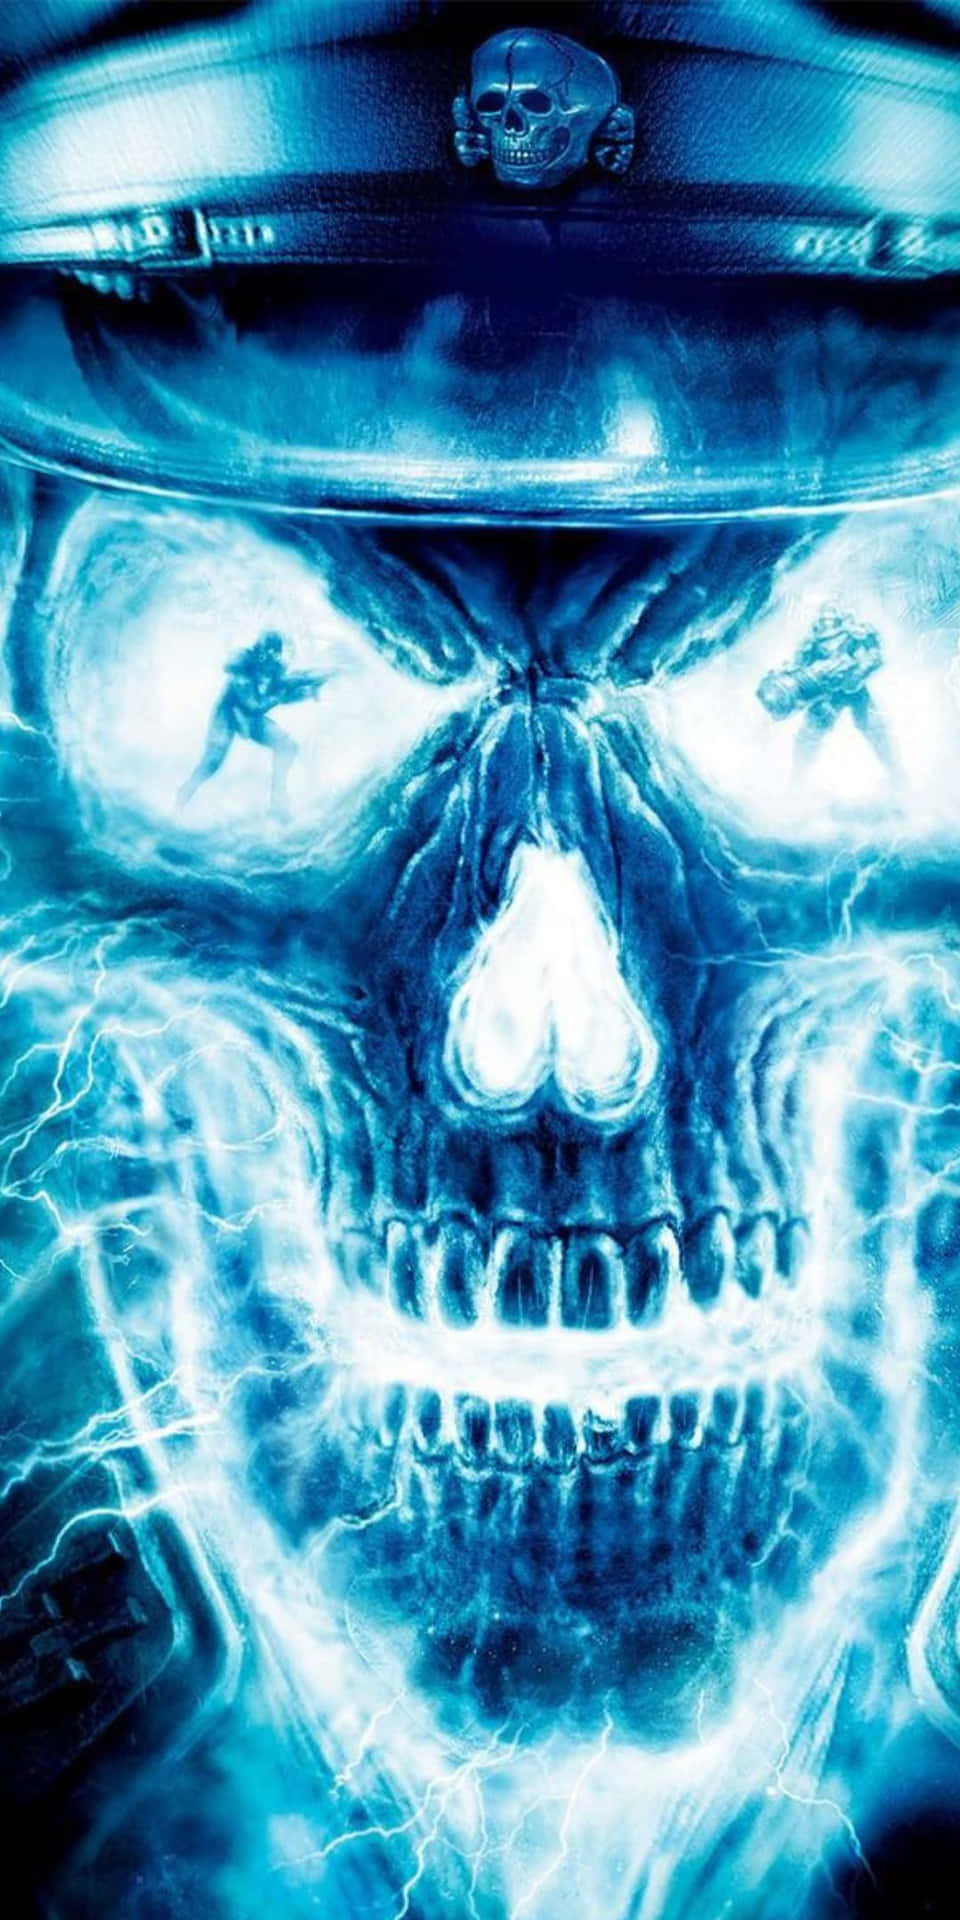 A Skull With A Blue Light Shining On It